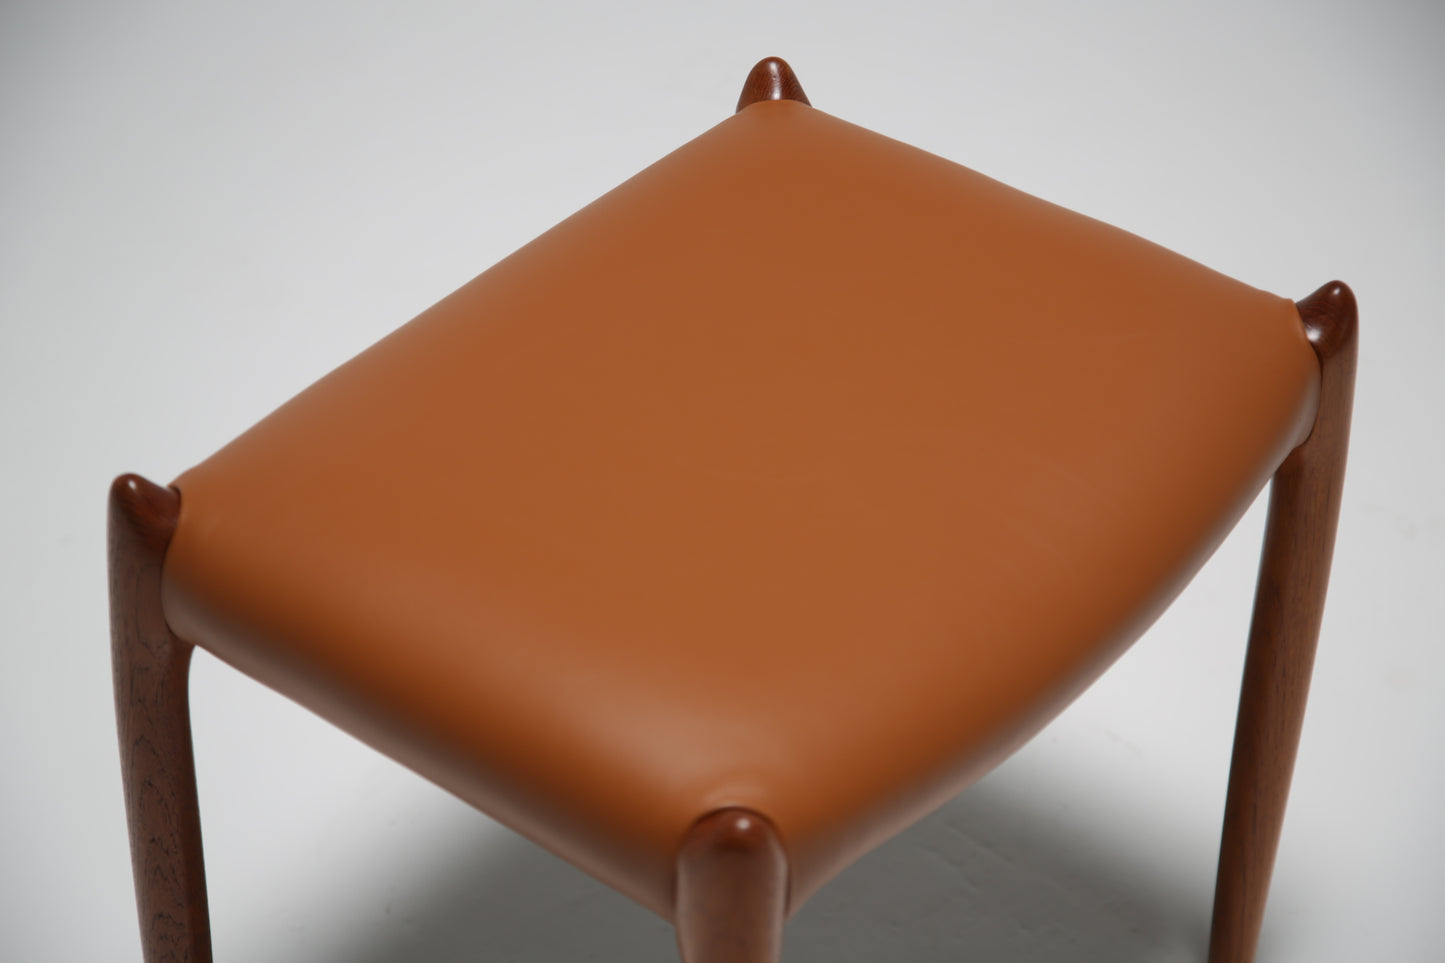 Niels Moller model 78A teak and leather stool